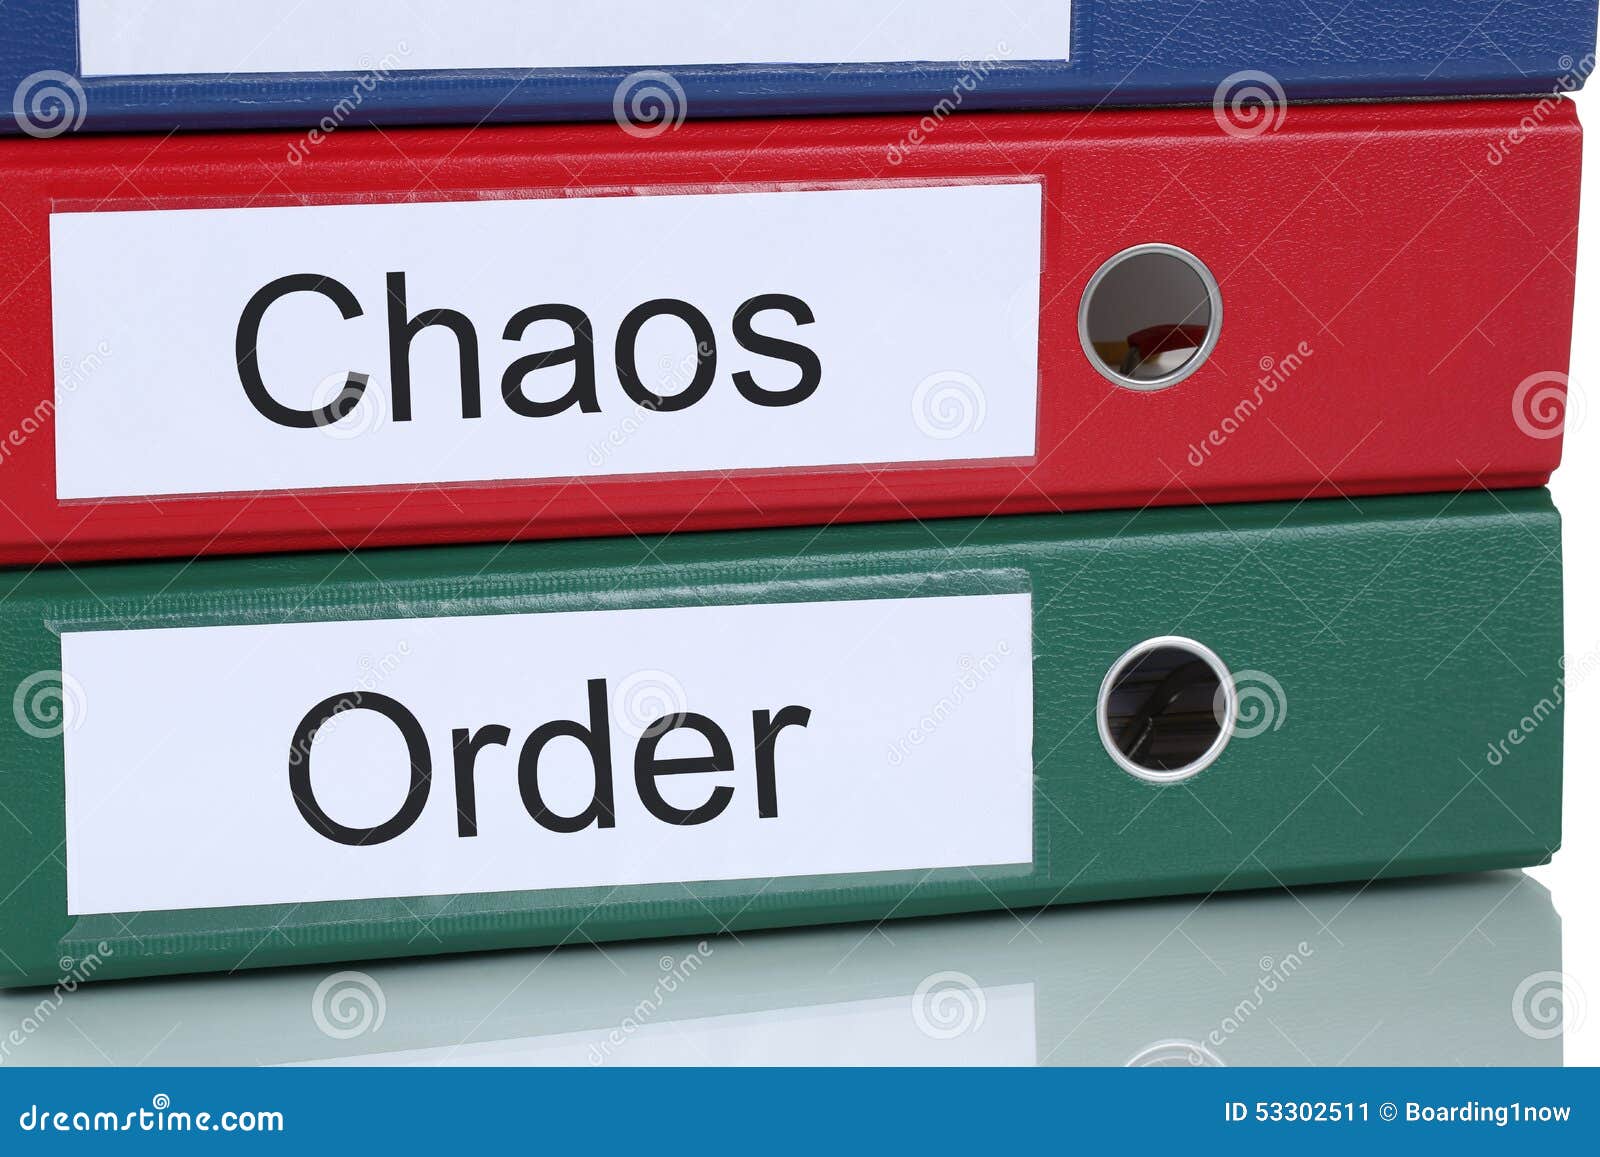 chaos and order organisation in office business concept